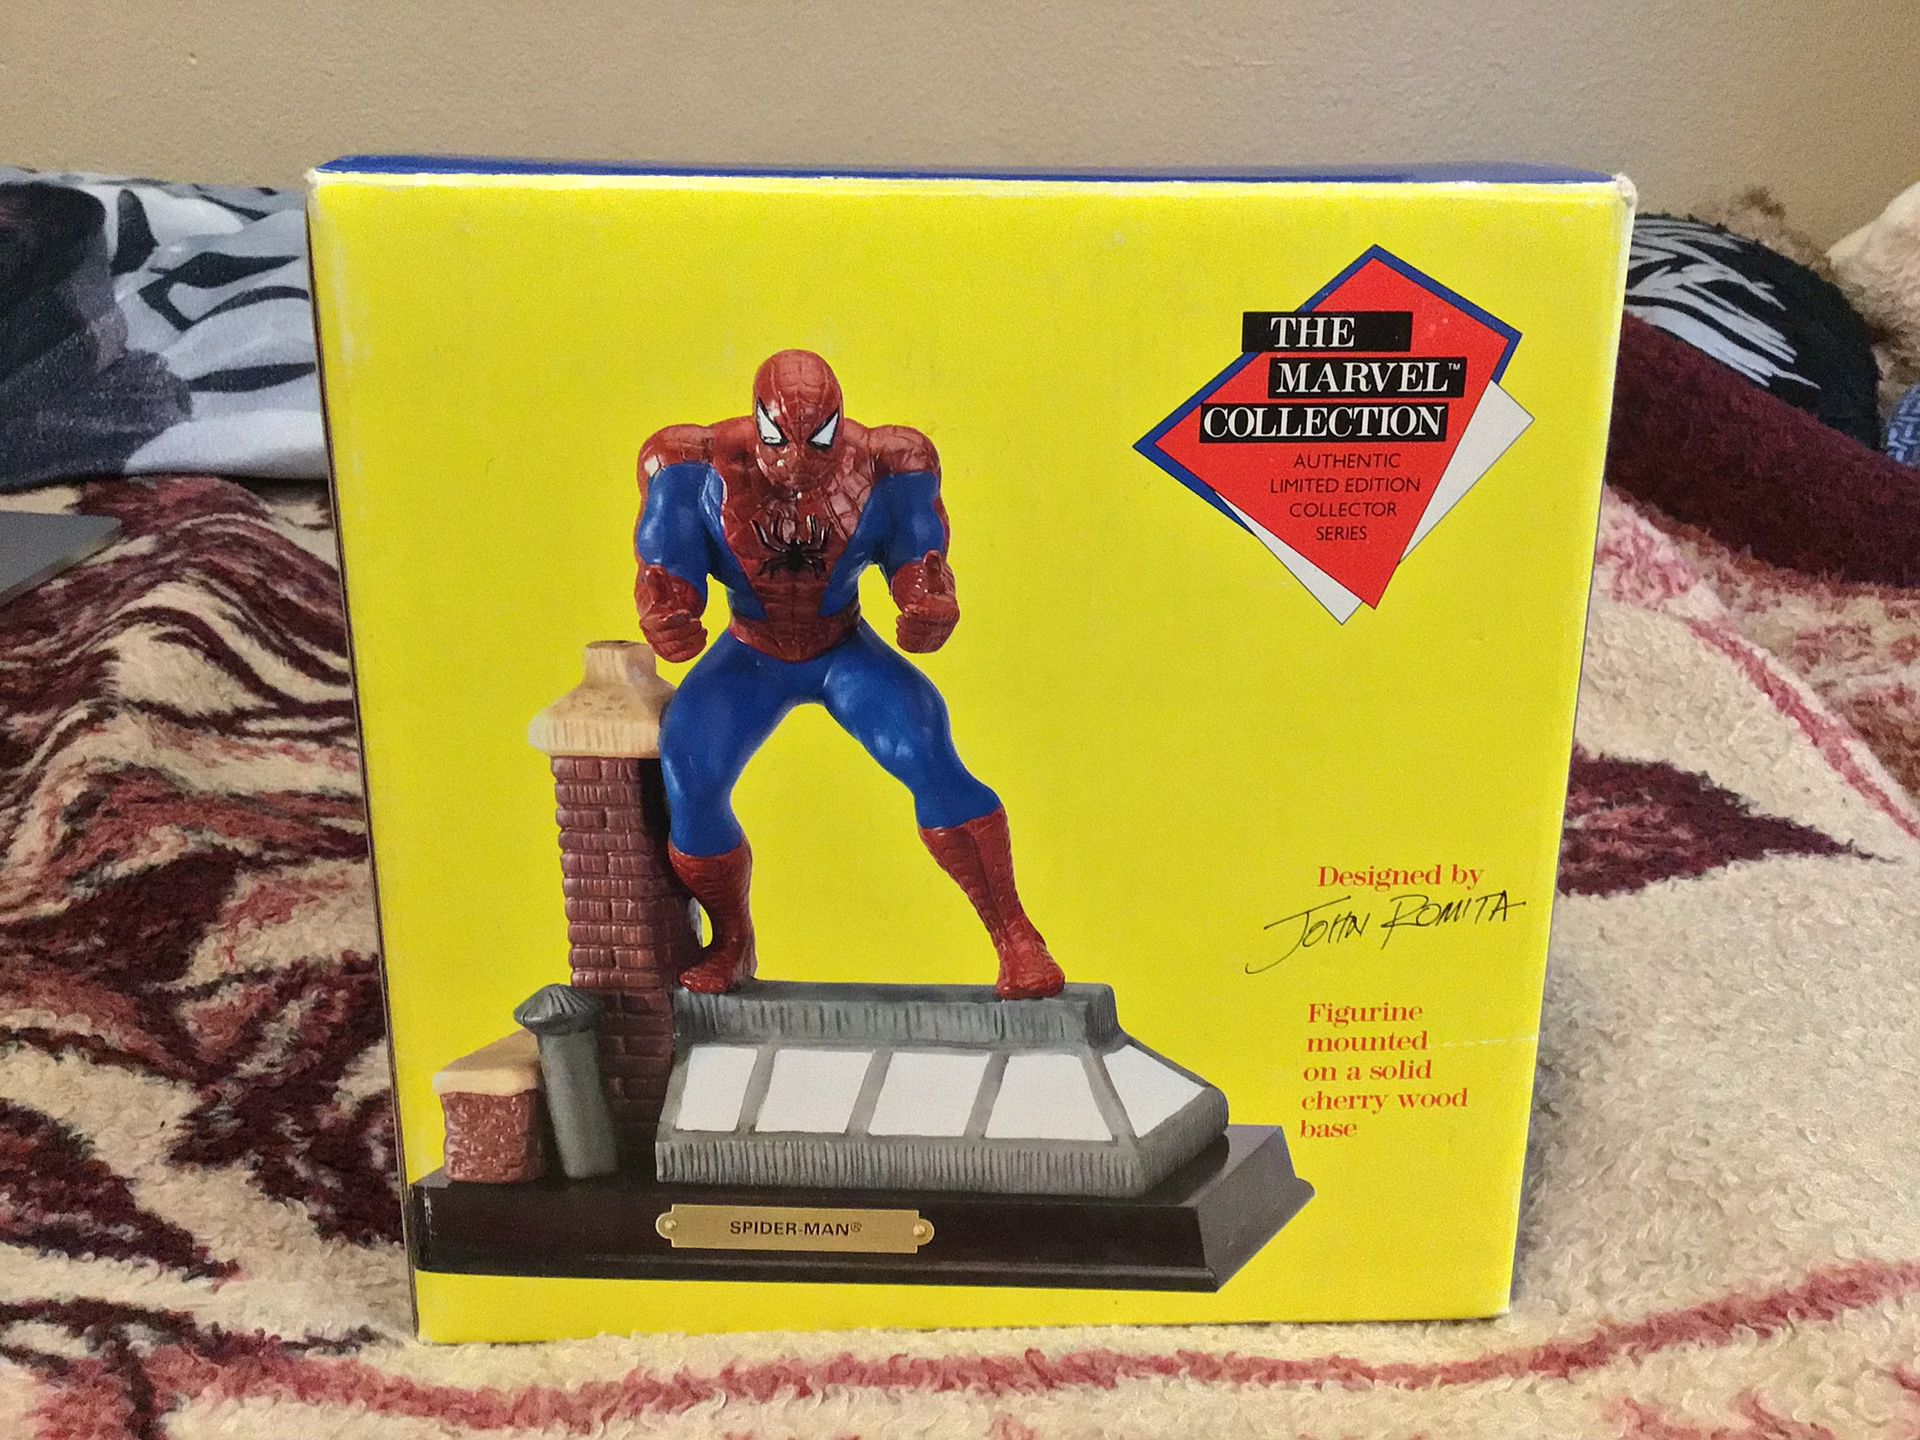 Marvel Collection Spider-Man limited edition